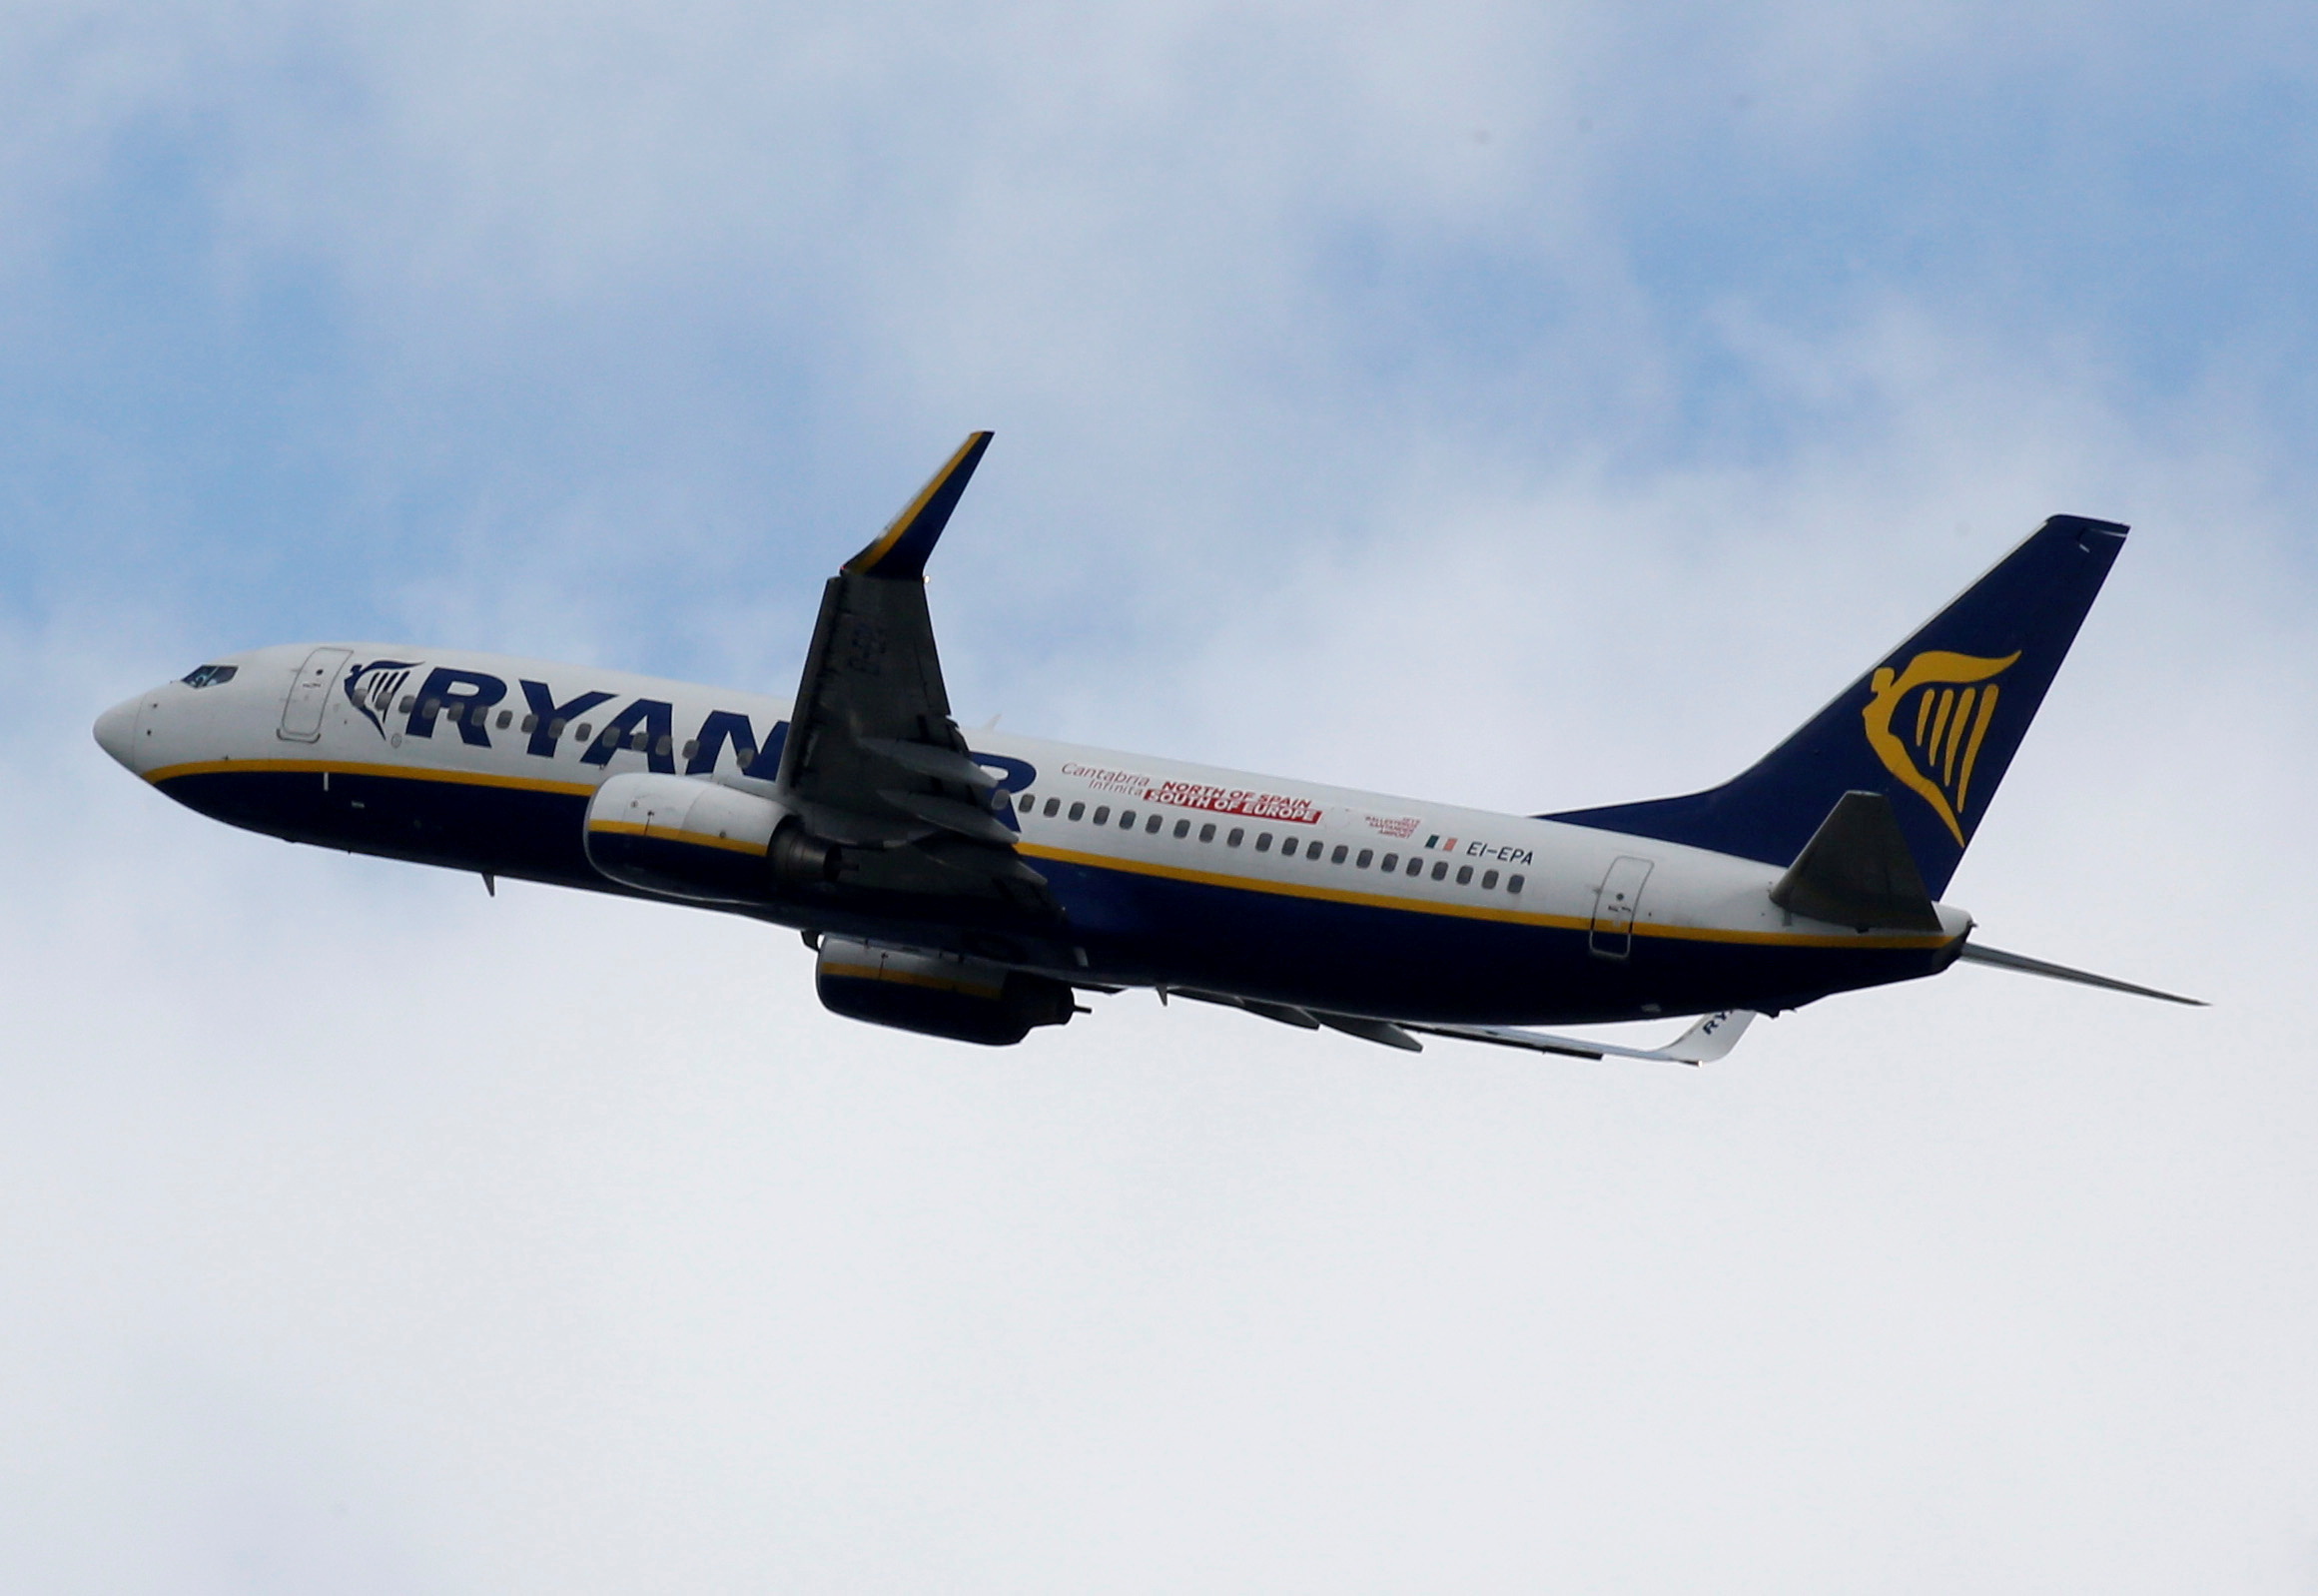 A Ryanair commercial passenger jet takes off in Blagnac near Toulouse, France, May 29, 2019. REUTERS/Regis Duvignau